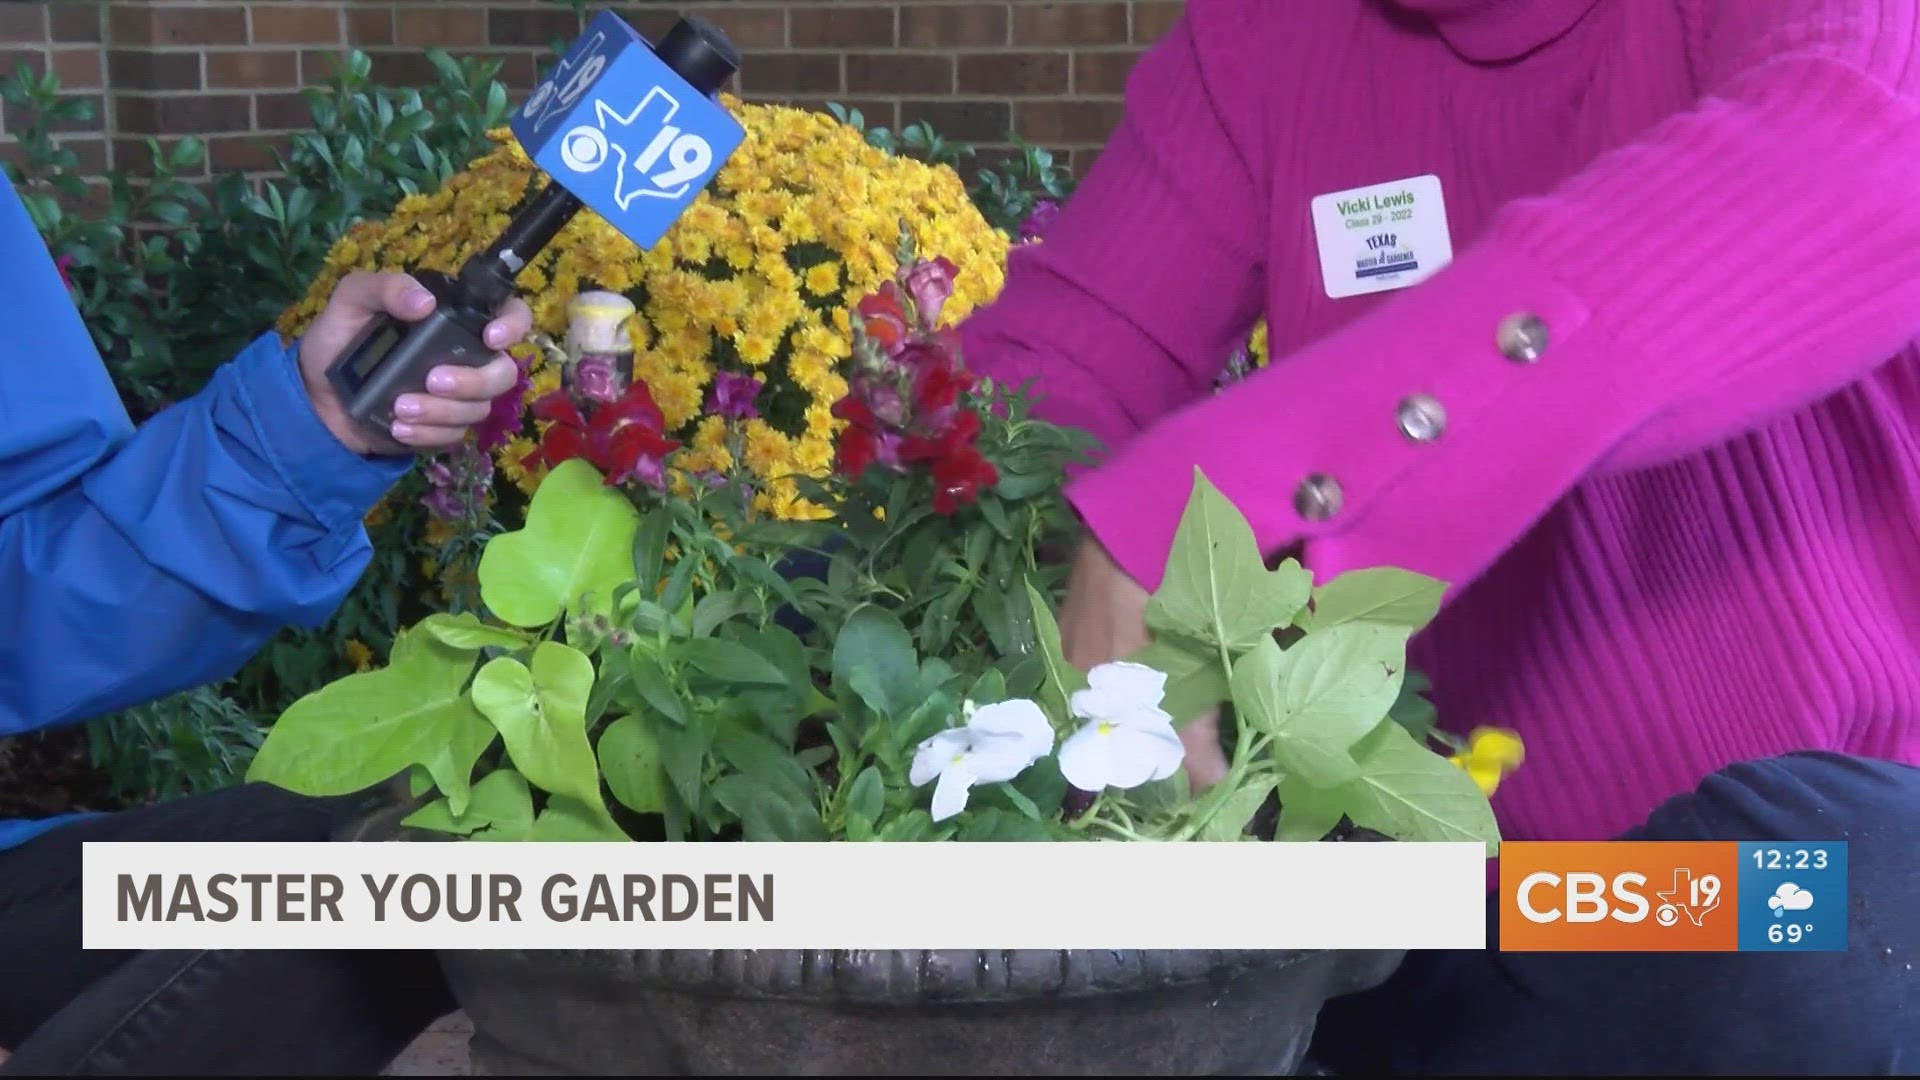 Also, don't forget to enter CBS19 and J&J Exterminating's Yard of the Month Contest!